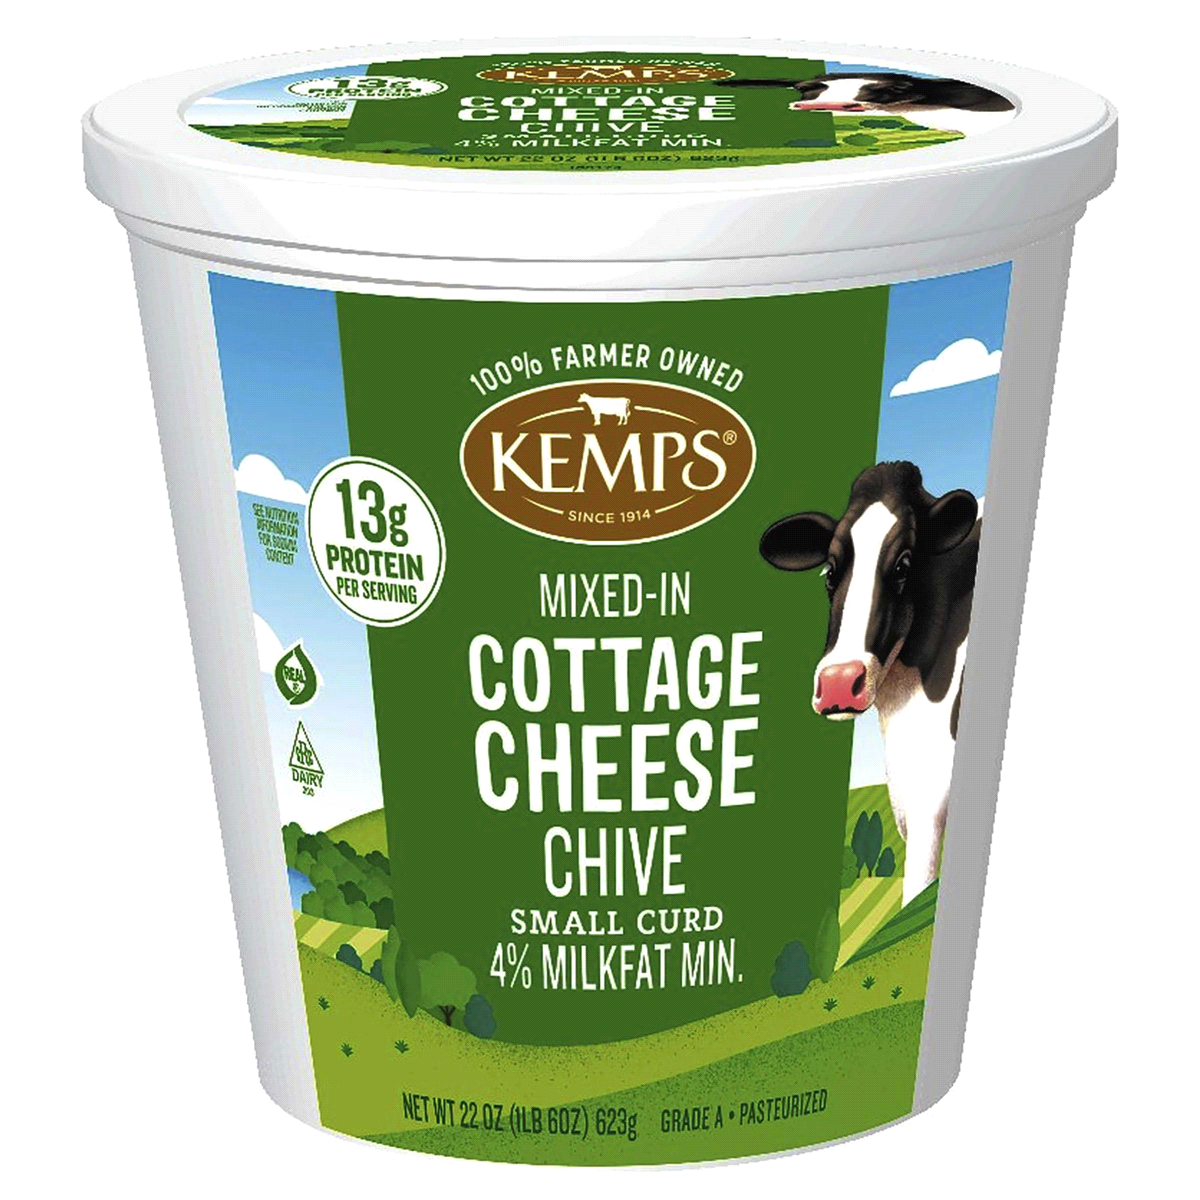 slide 1 of 5, Kemps Cottage Cheese Chive, Small Curd, 22 oz